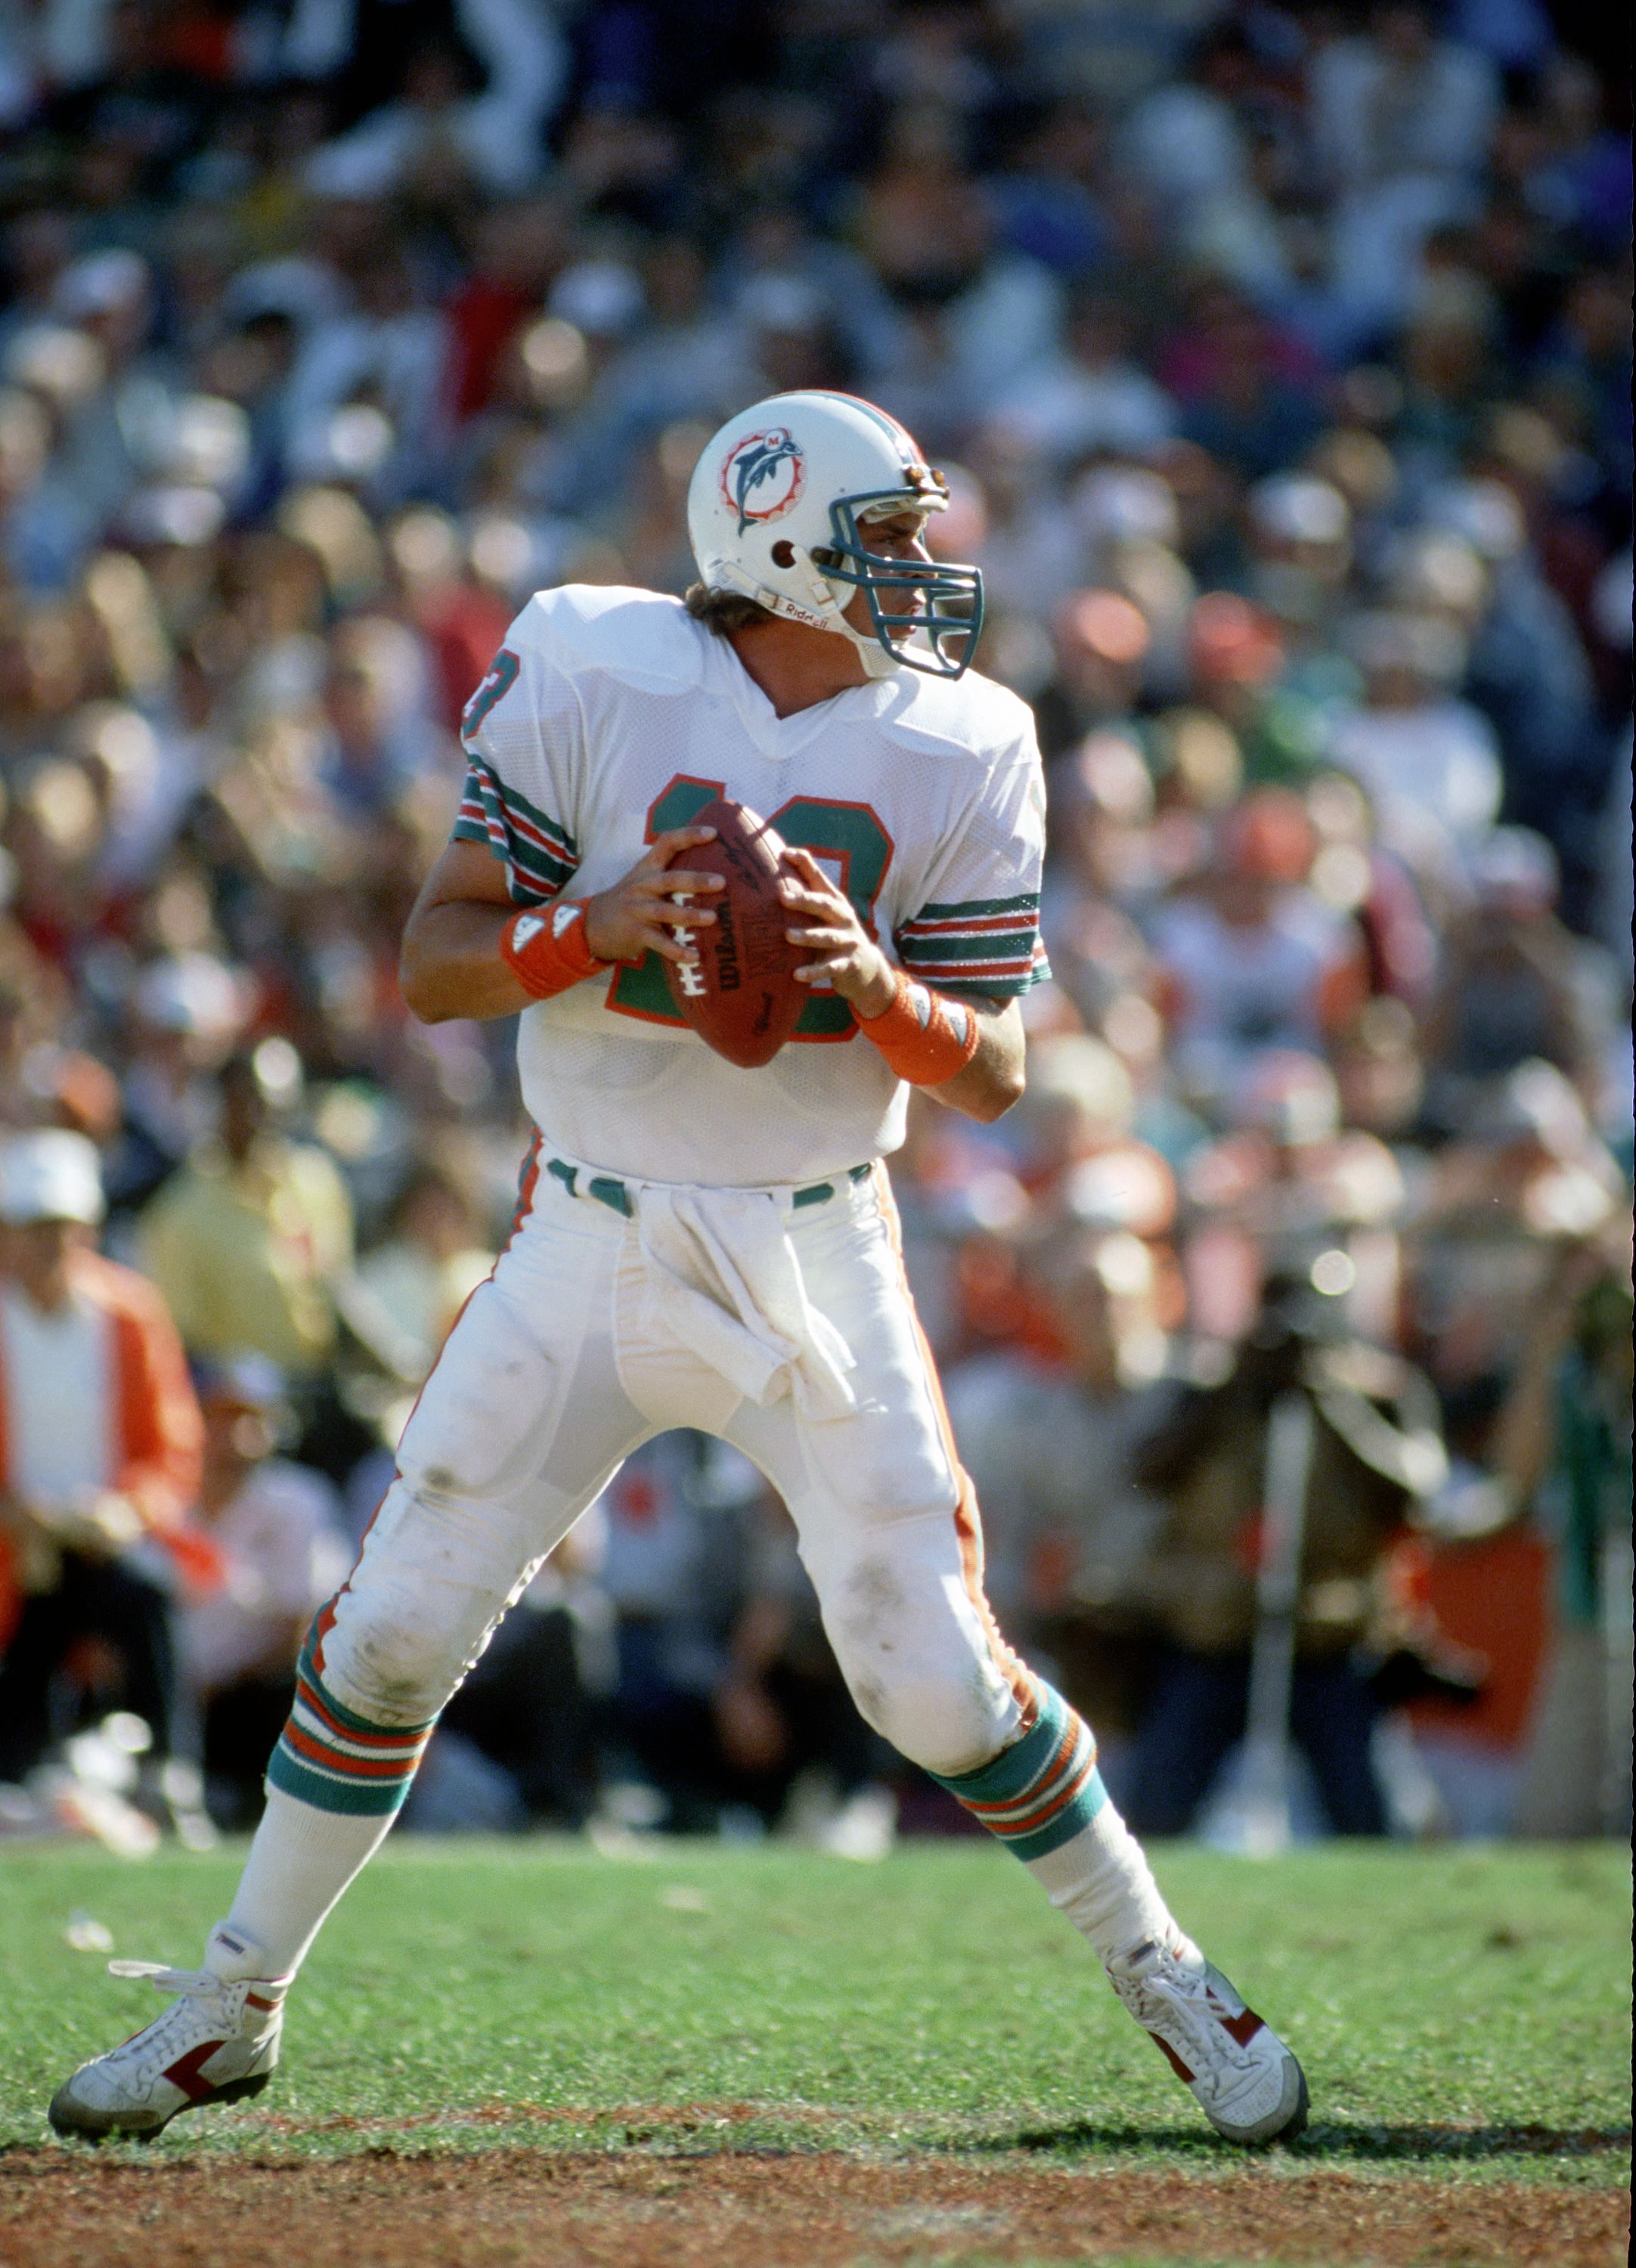 Dan Marino #13 of the Miami Dolphins looks to pass during the 1984 season AFC Championship game against the Pittsburgh Steelers at the Orange Bowl on January 6, 1985 in Miami, Florida. | Source: Getty Images